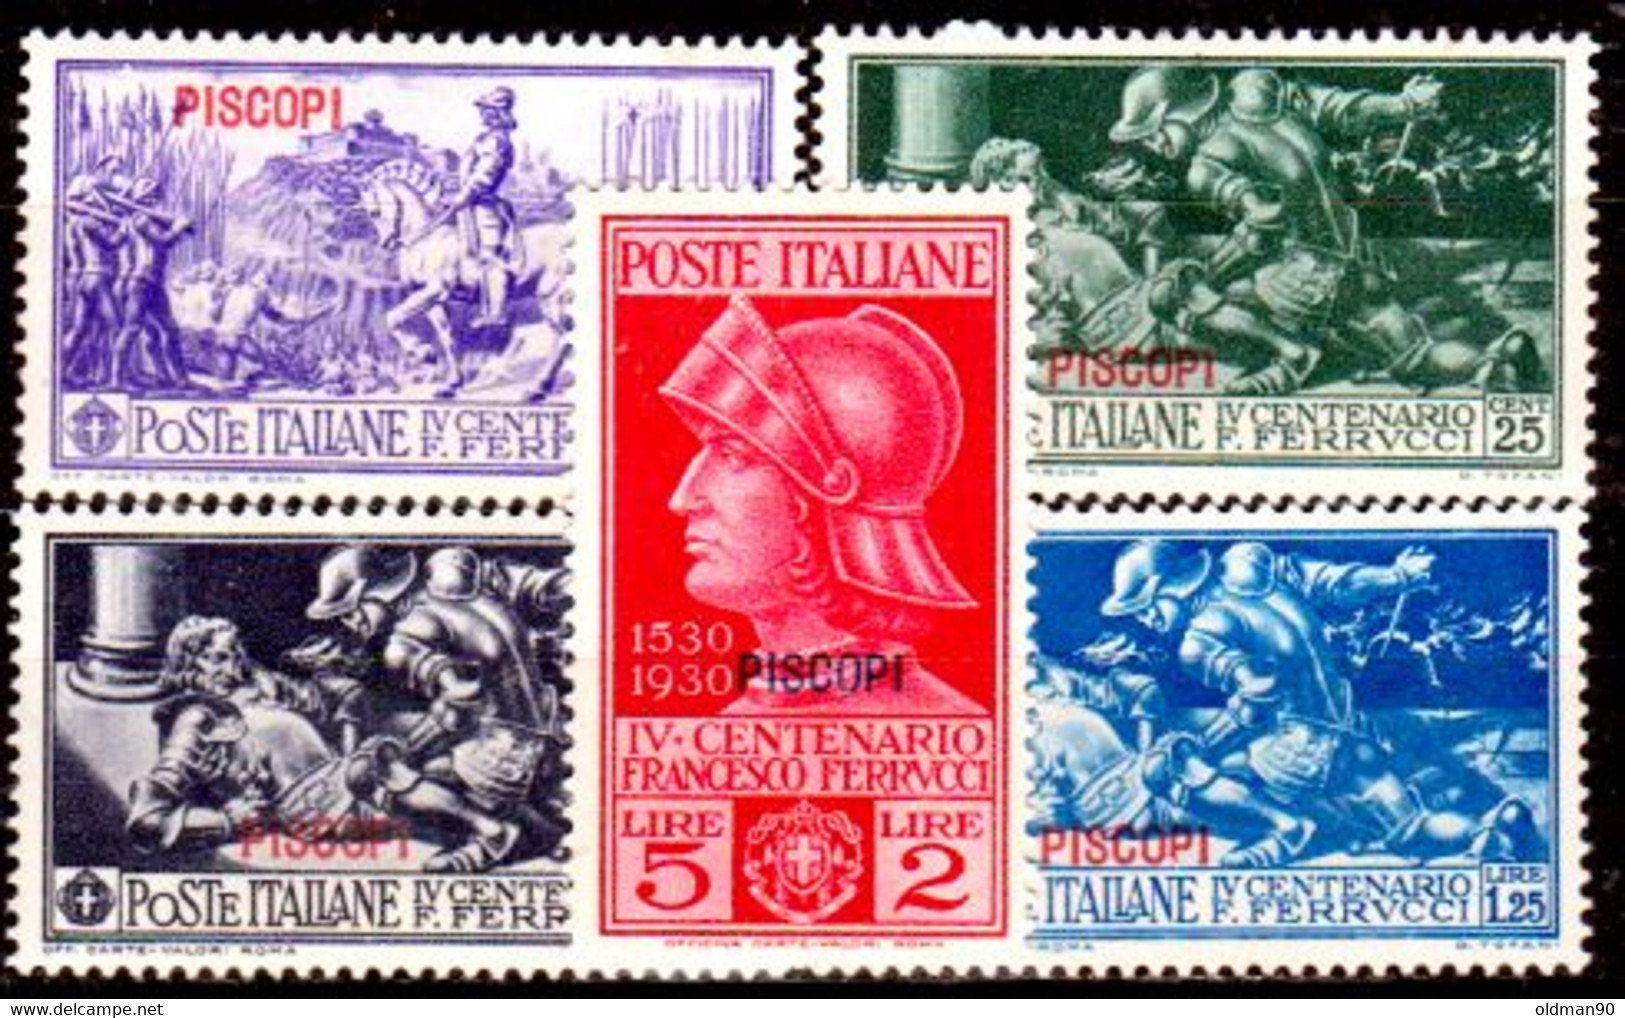 Egeo-OS-322- Piscopi: Original Stamps And Overprint 1930 (++) MNH - Quality In Your Opinion. - Egeo (Piscopi)